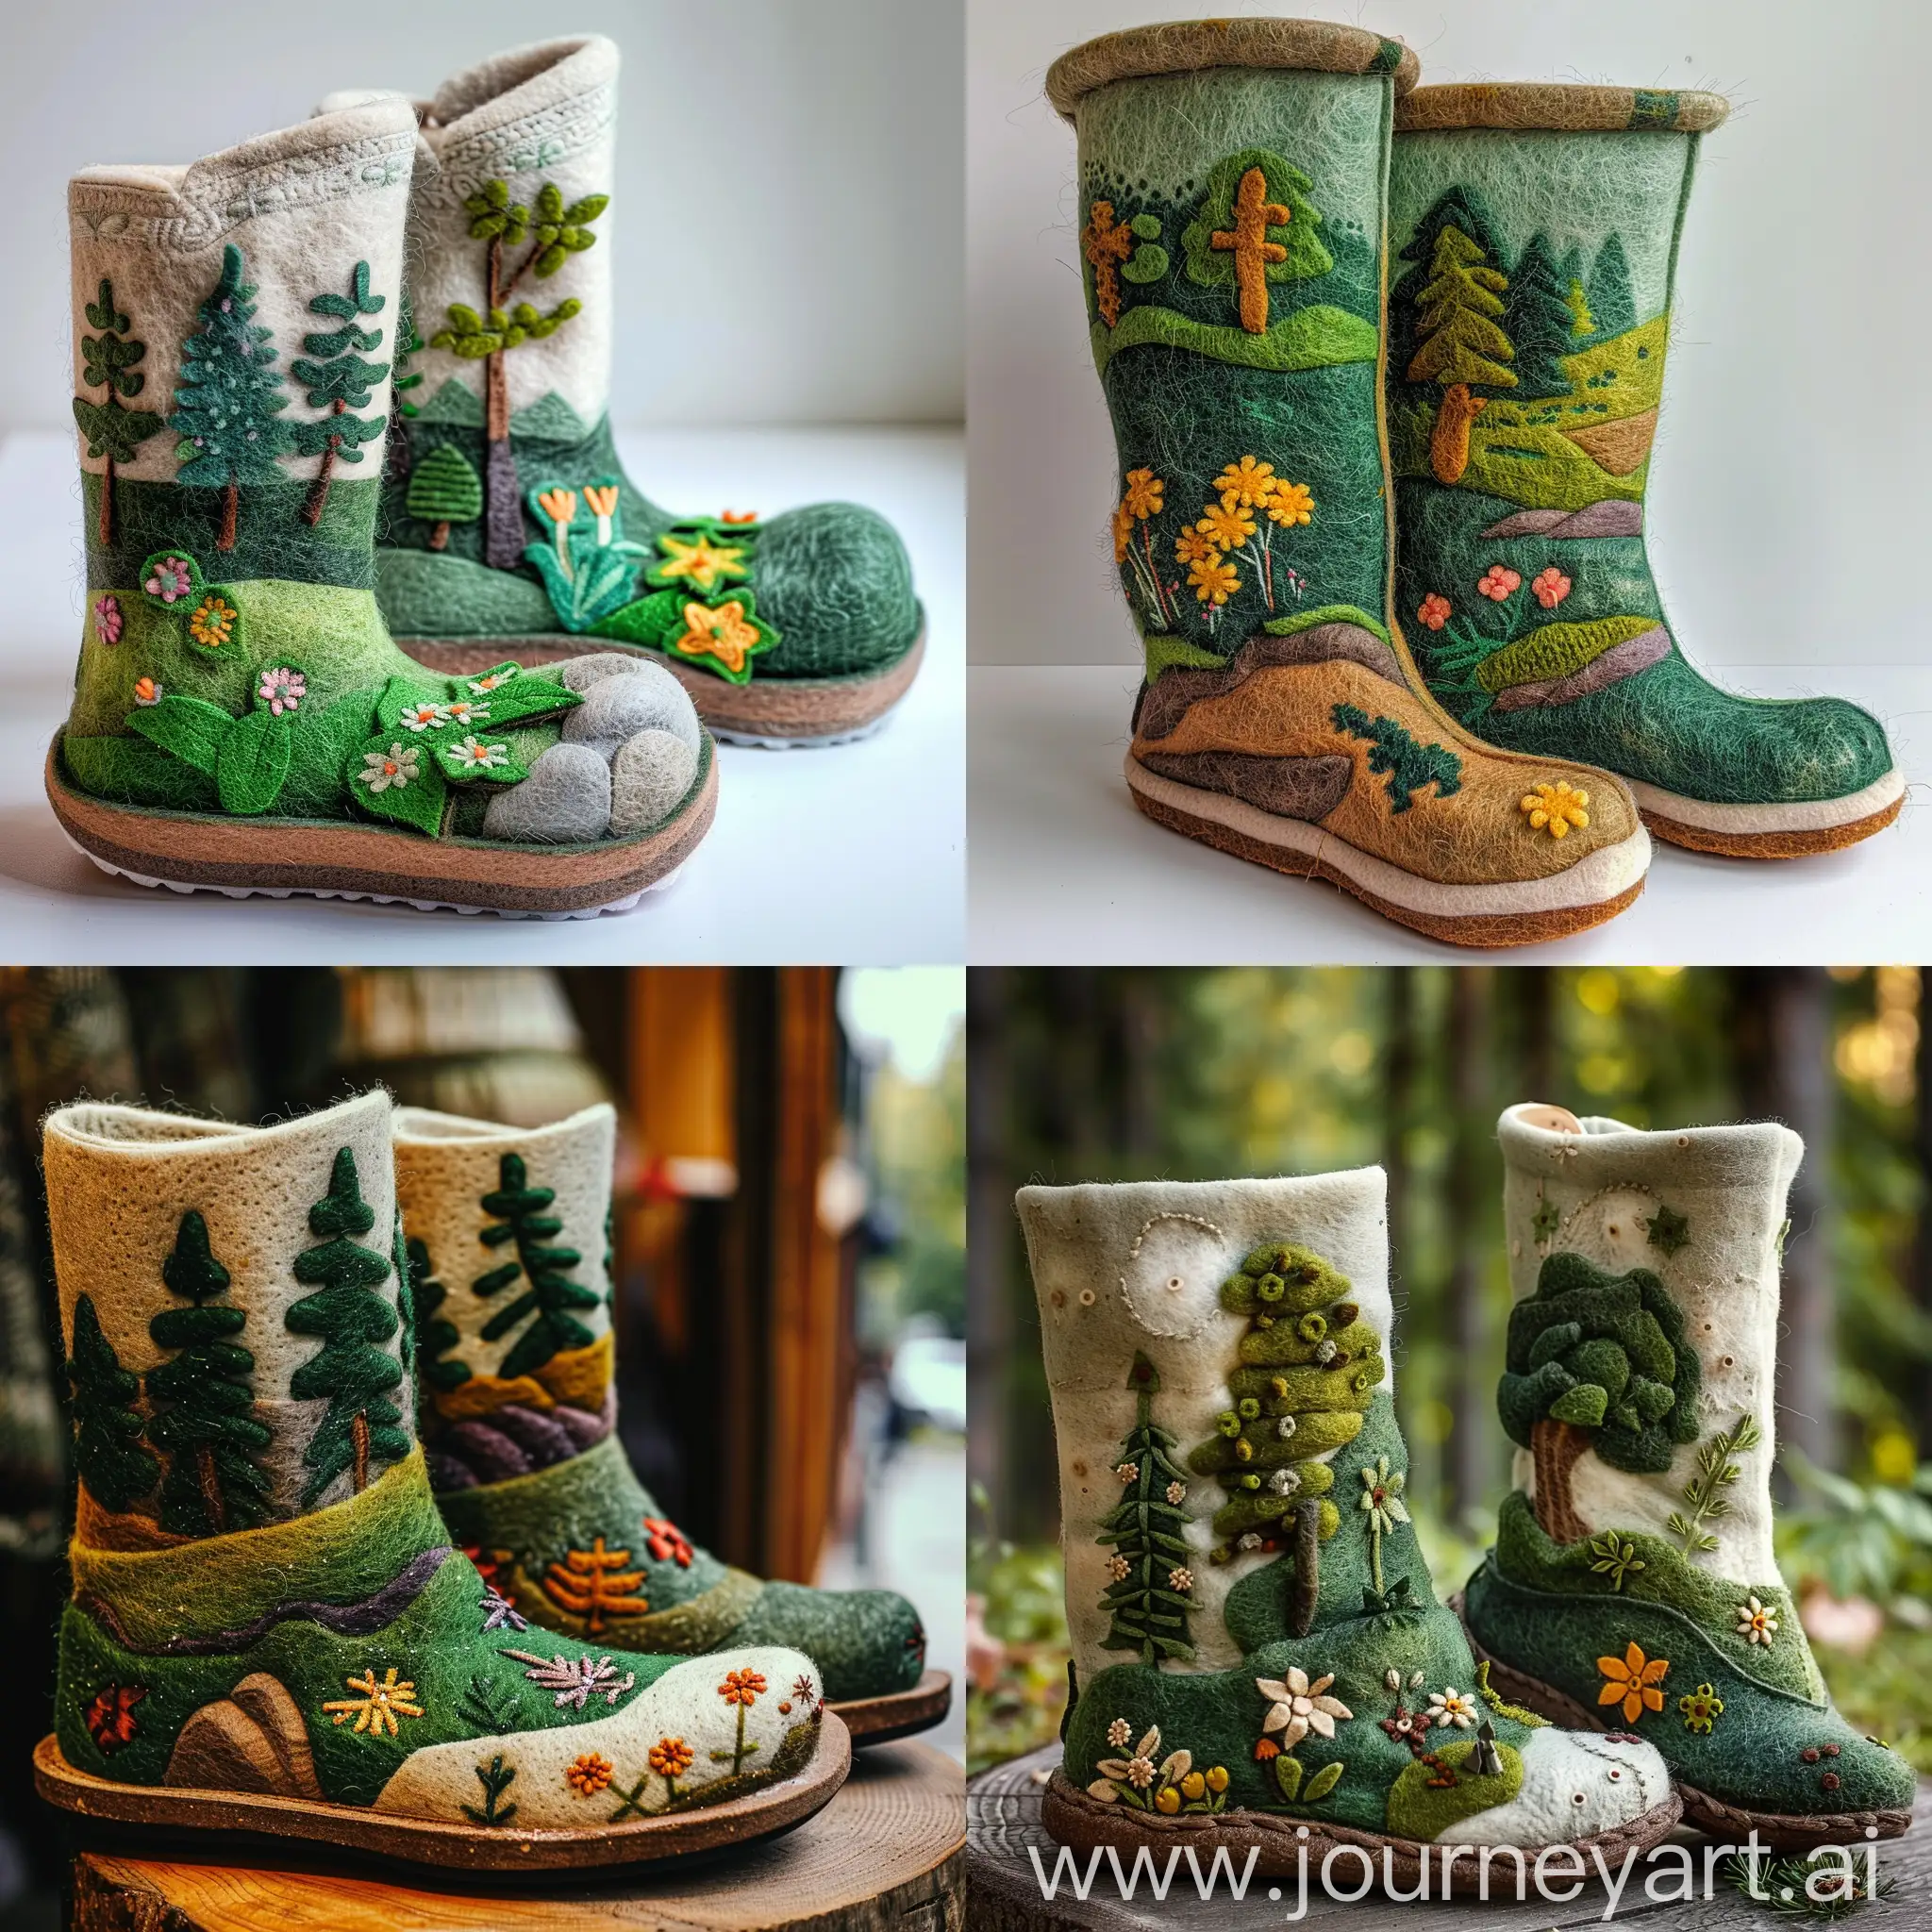 Two boots are visible in the image. The boots look like valenki — traditional Russian winter shoes made of warm felt fabric. The decor shows that the boots are decorated: they depict green landscapes with trees and flowers
